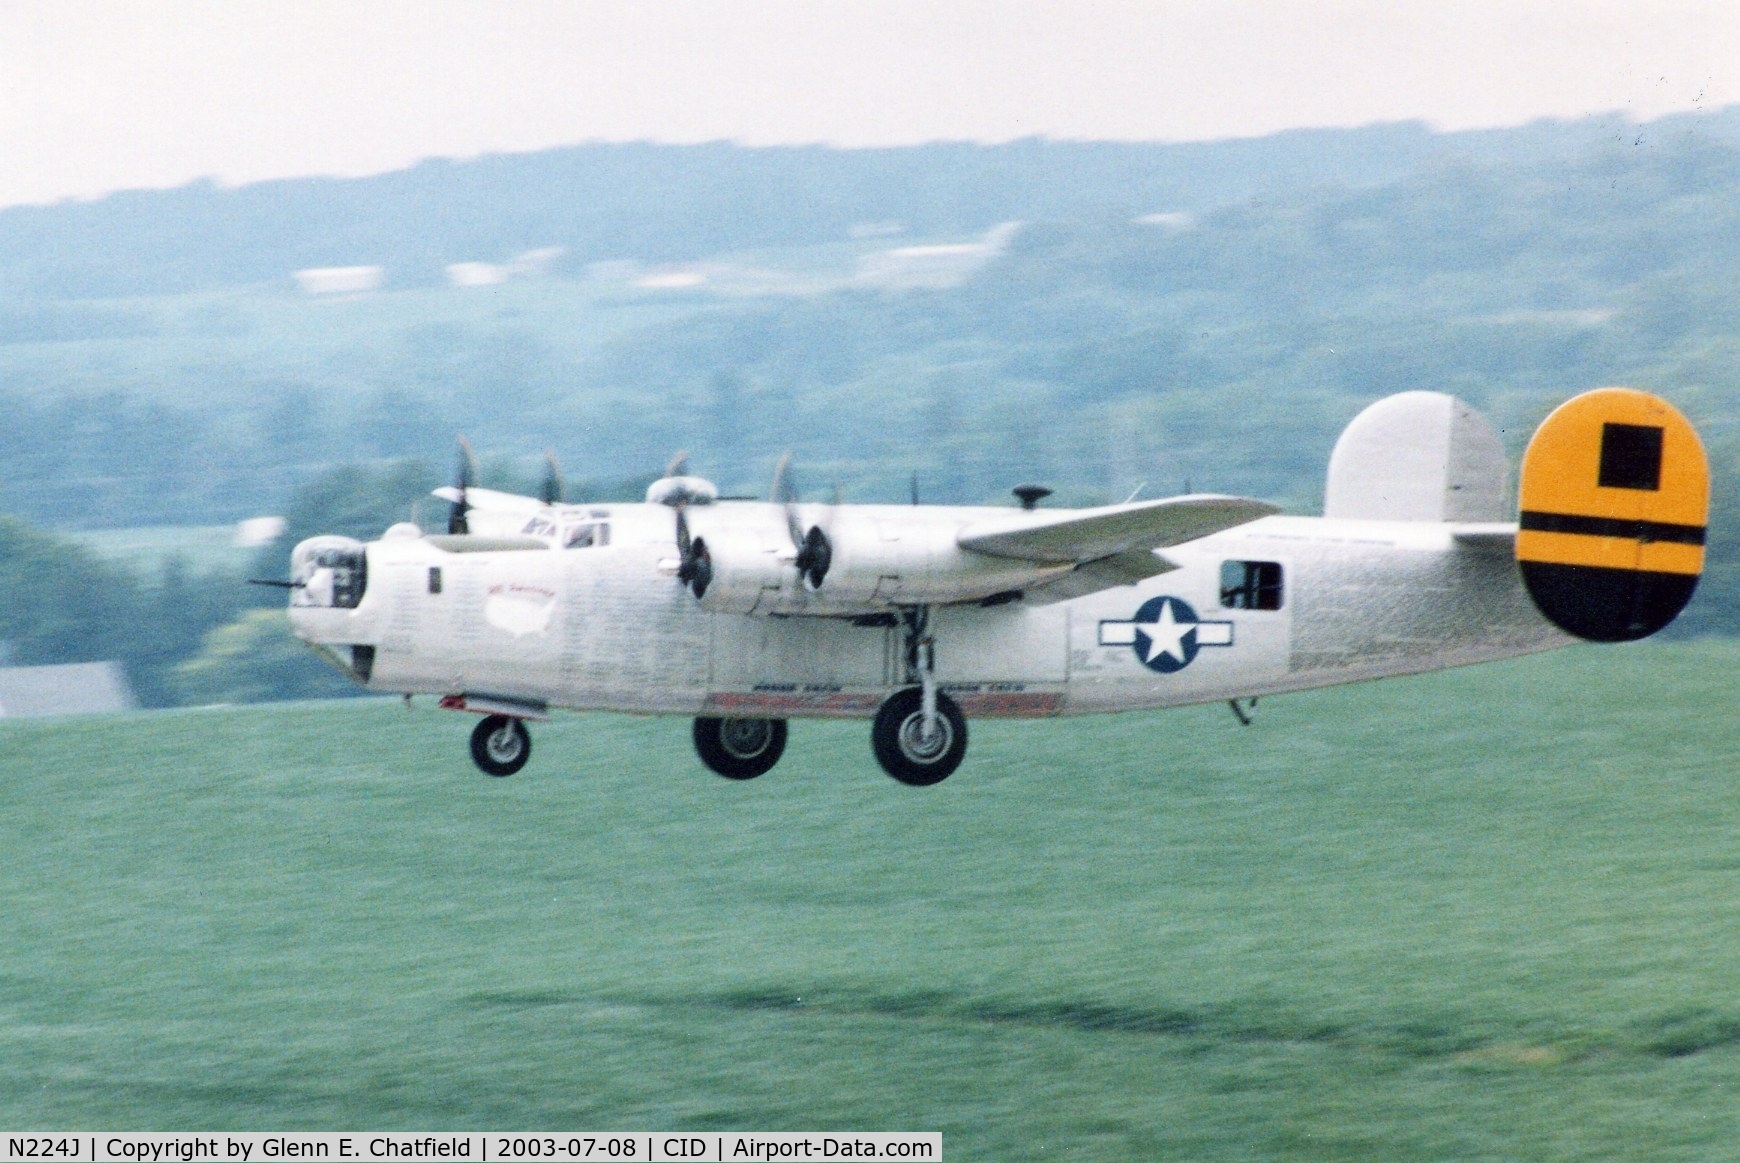 N224J, 1944 Consolidated B-24J-85-CF Liberator C/N 1347 (44-44052), Departing runway 9, shot from the tower with 1000mm lens